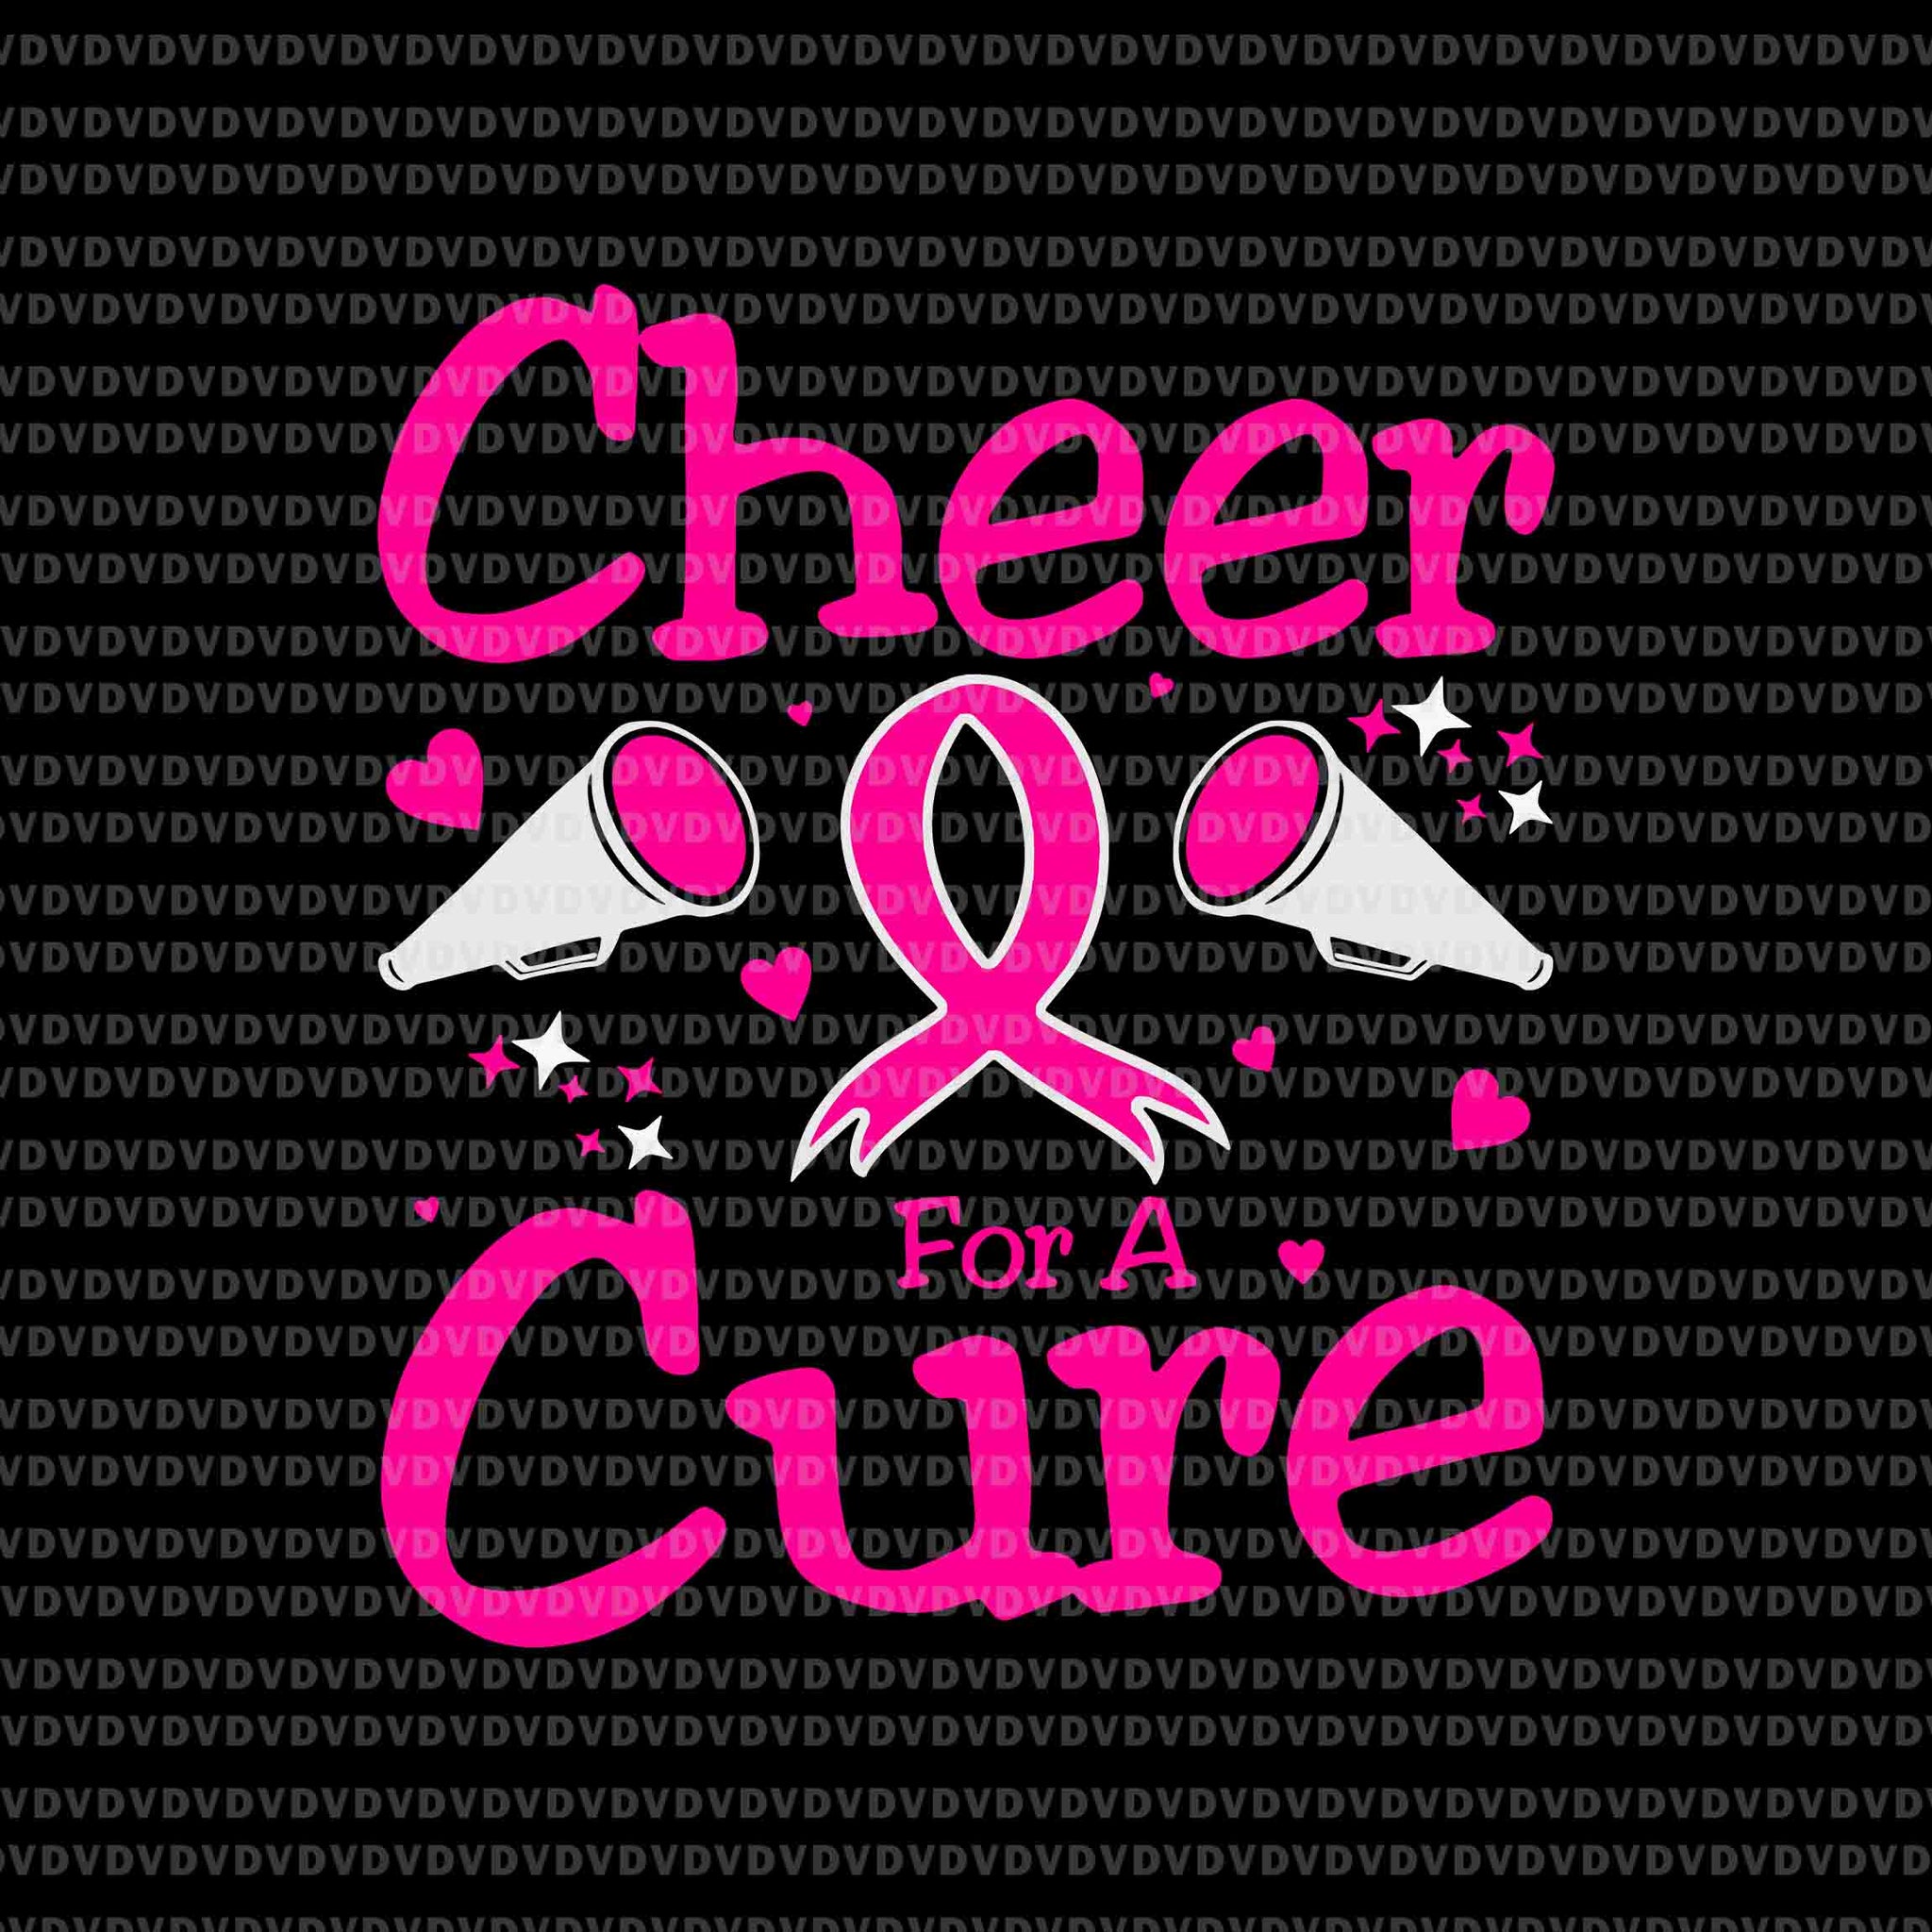 Cheer For A Cure Breast Cancer Awareness Svg, Breast Cancer Awareness Svg, Pink Ripon Svg, Autumn Svg, Cheer For A Cure Svg